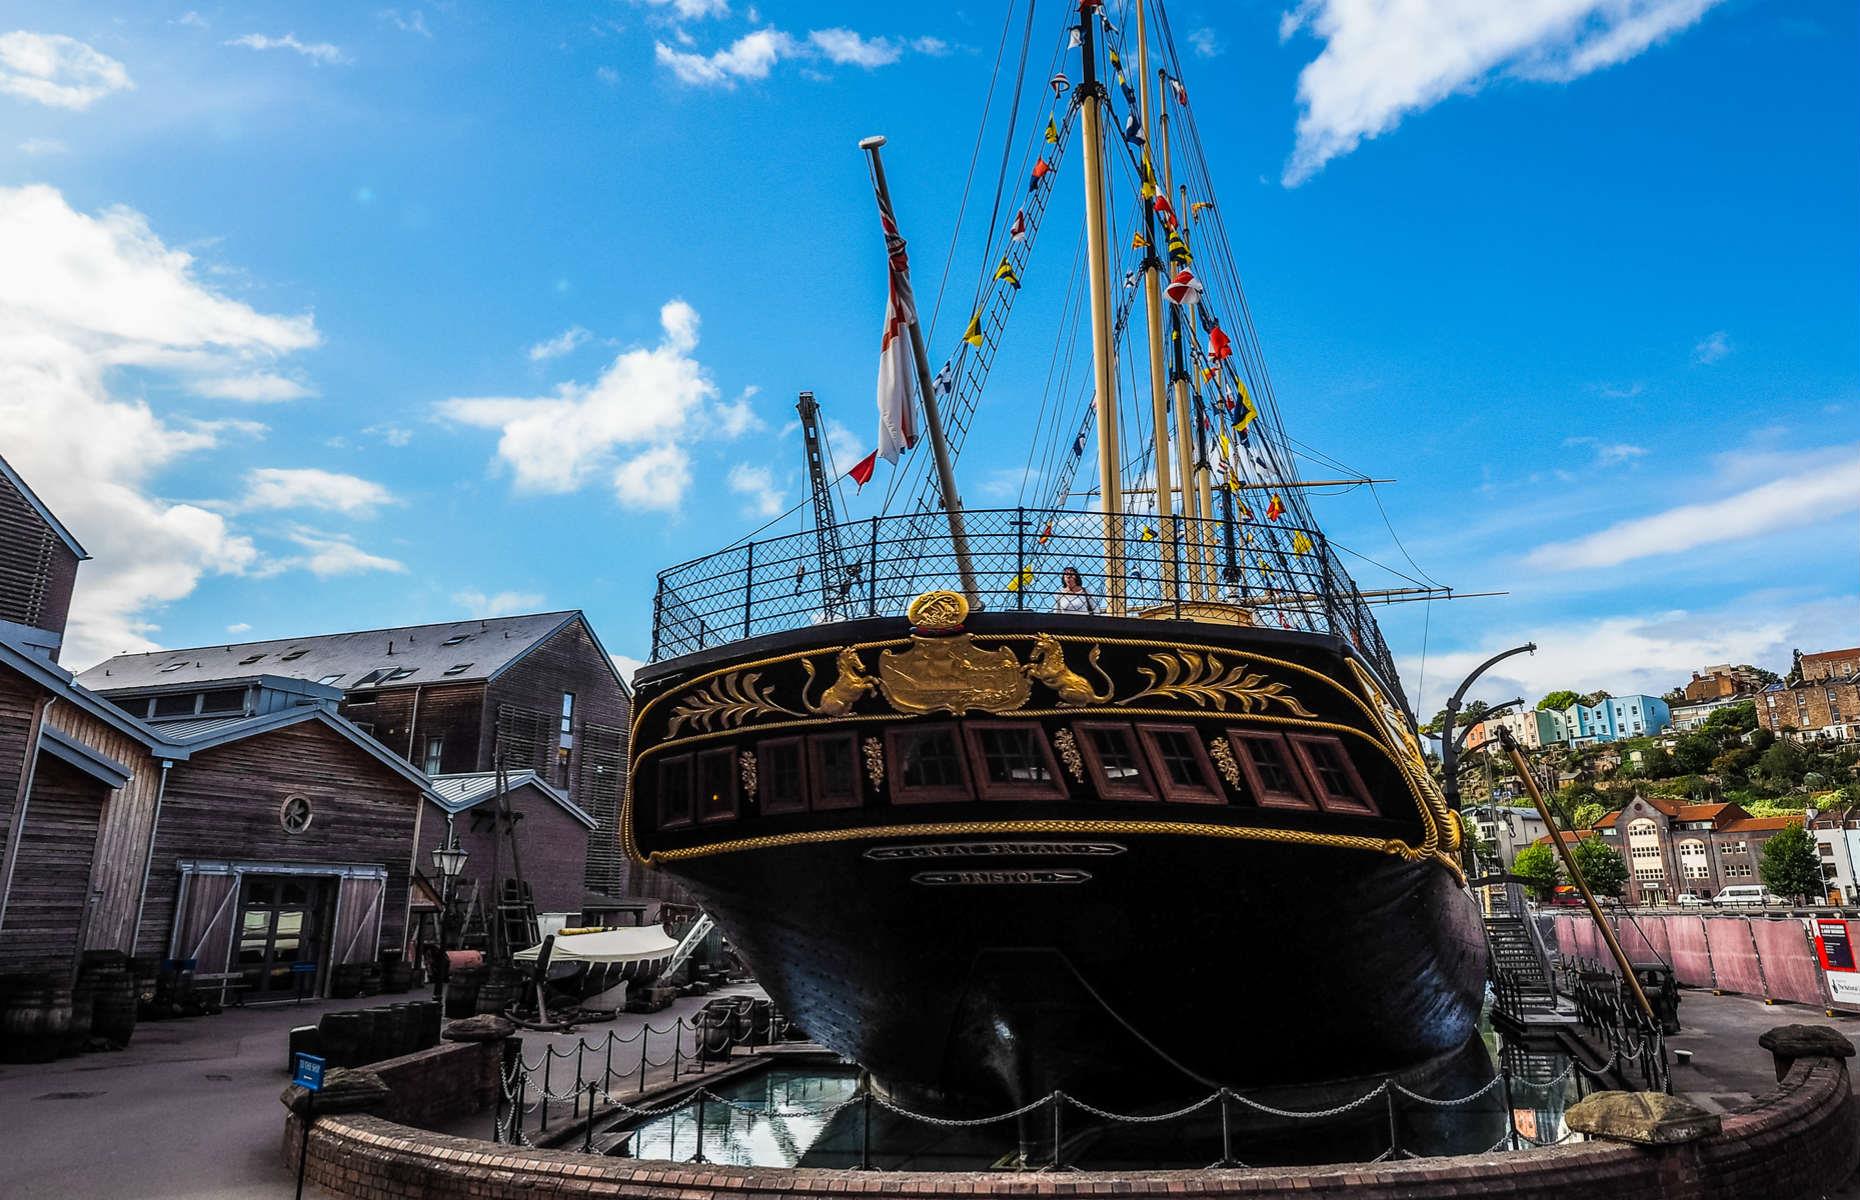 <p>The ship was converted into a cargo vessel and remained in use as a storage ship until 1933 but was then left to rust after a failed rescue mission. But in 1970, a landmark salvage effort brought her back to life. She was returned to the original Great Western Dockyard in Bristol, and now sits as an engaging museum in the city's historic harbor, with her passenger cabins and dining halls restored to their original glory. Right now, you only can visit SS Great Britain with <a href="https://www.ssgreatbritain.org/">pre-bought online tickets</a>.</p>